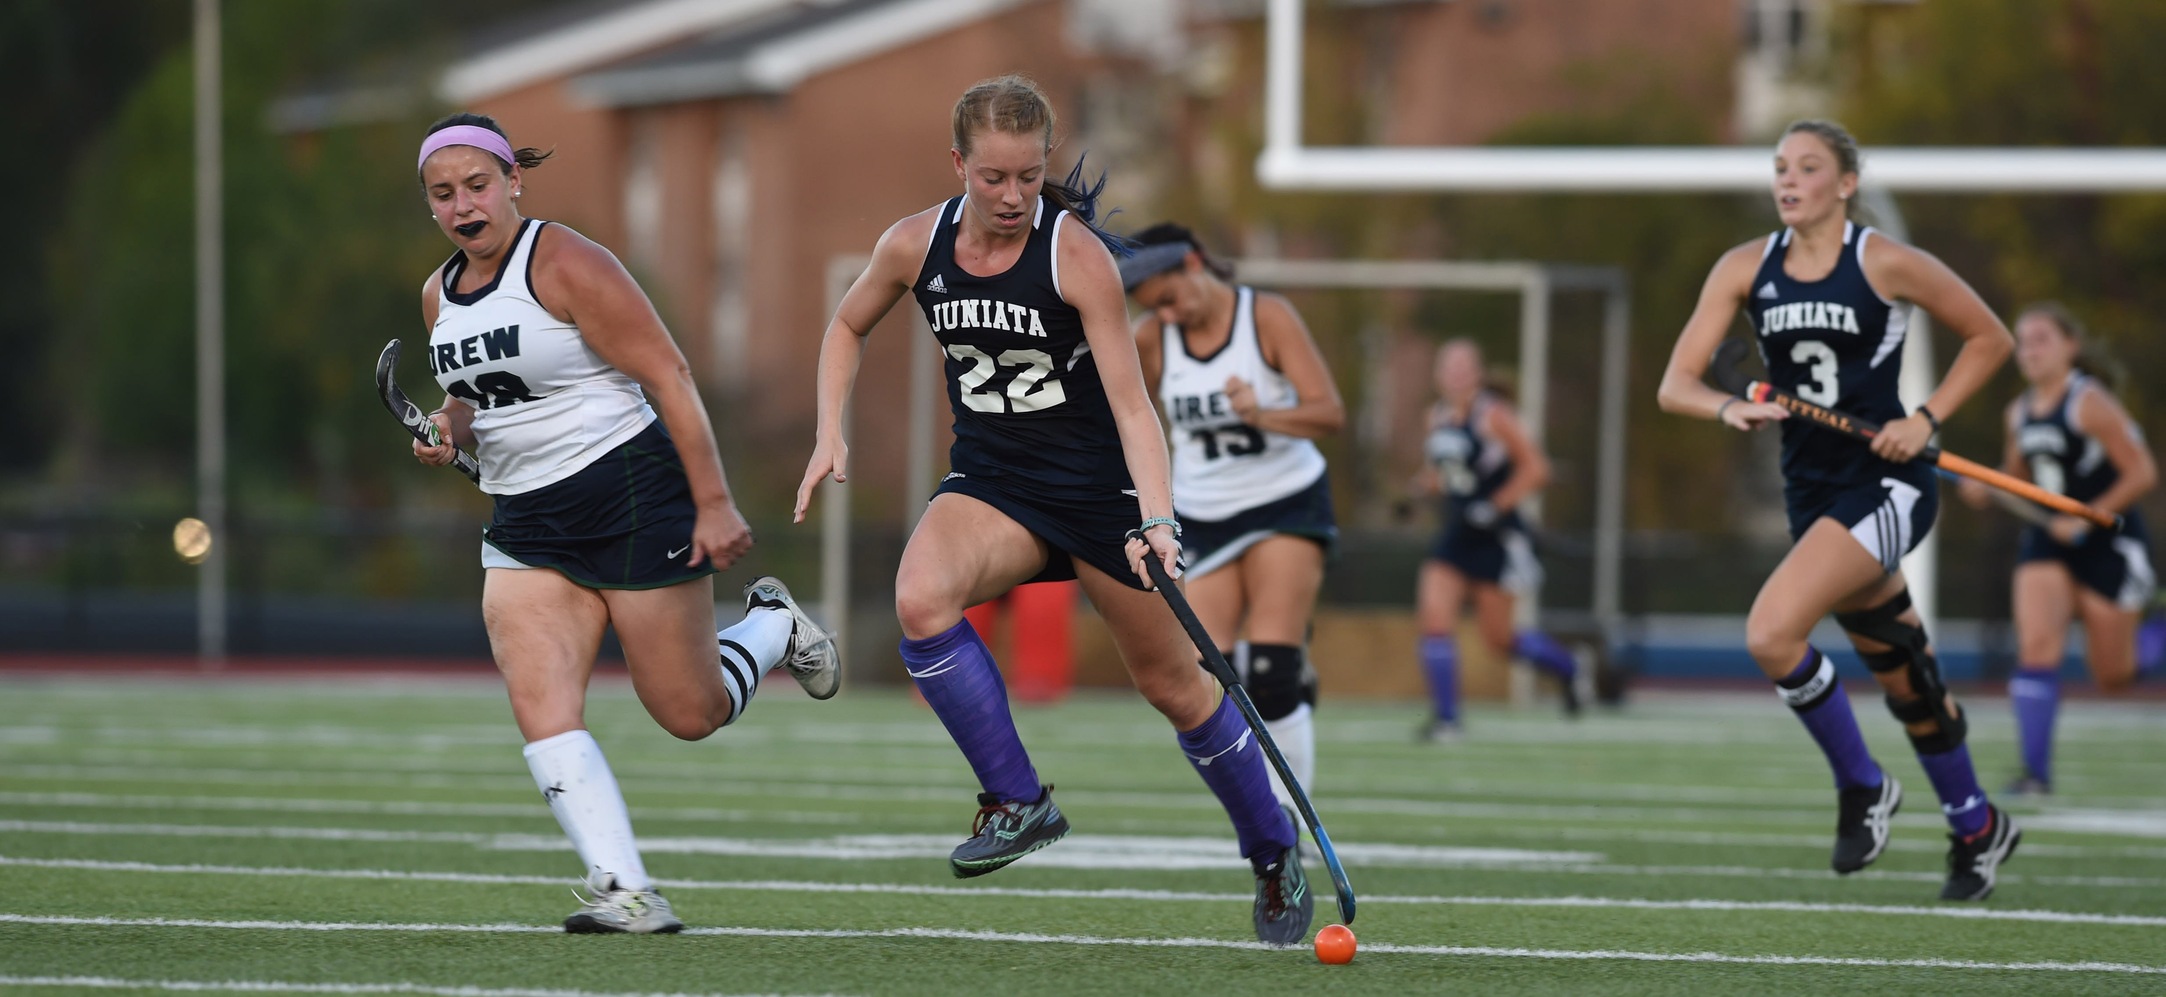 Rebecca Waite tallied two goals in the Eagles 3-2 overtime win against Lebanon Valley.